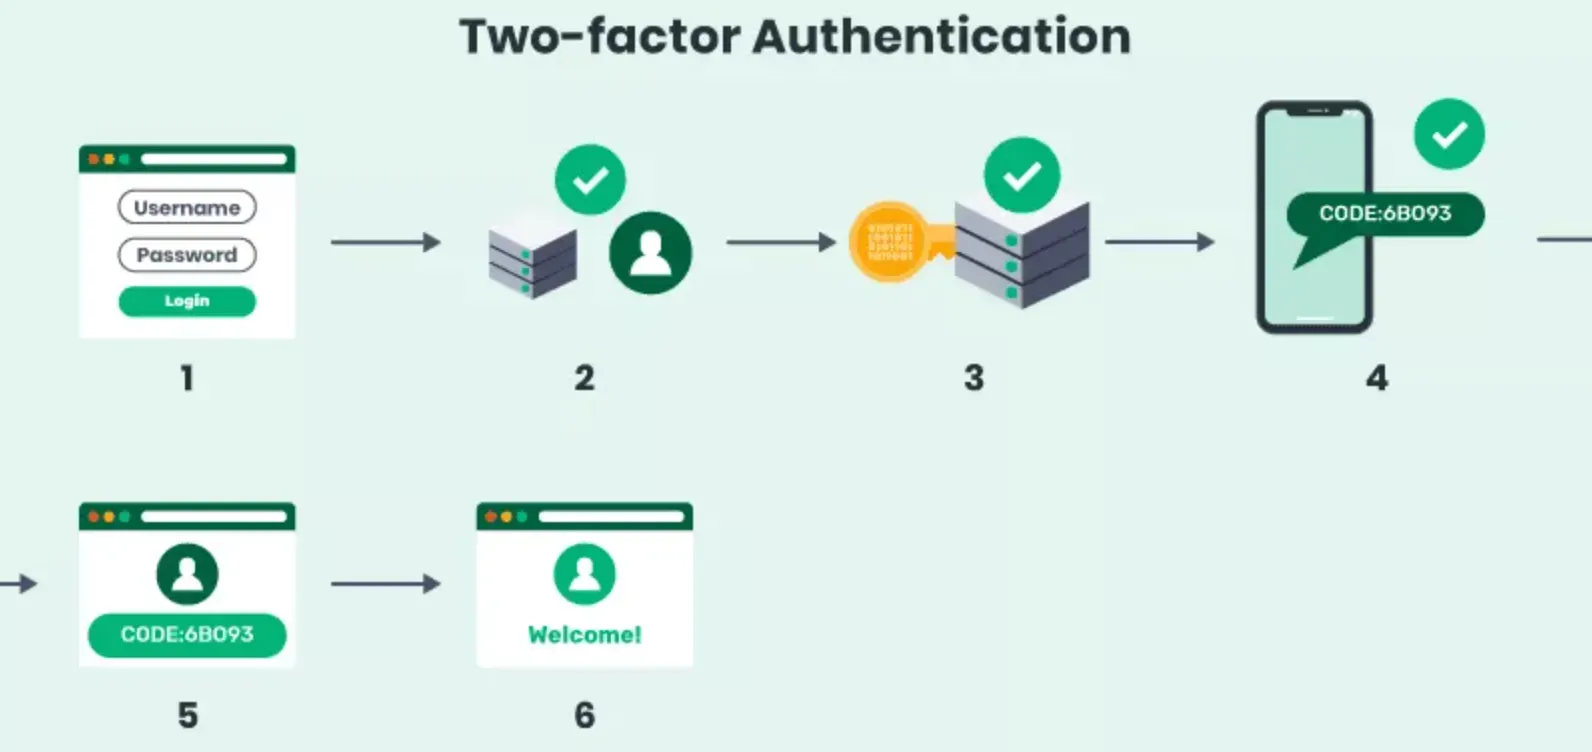 Step By Step Guide for Two-Factor Authentication